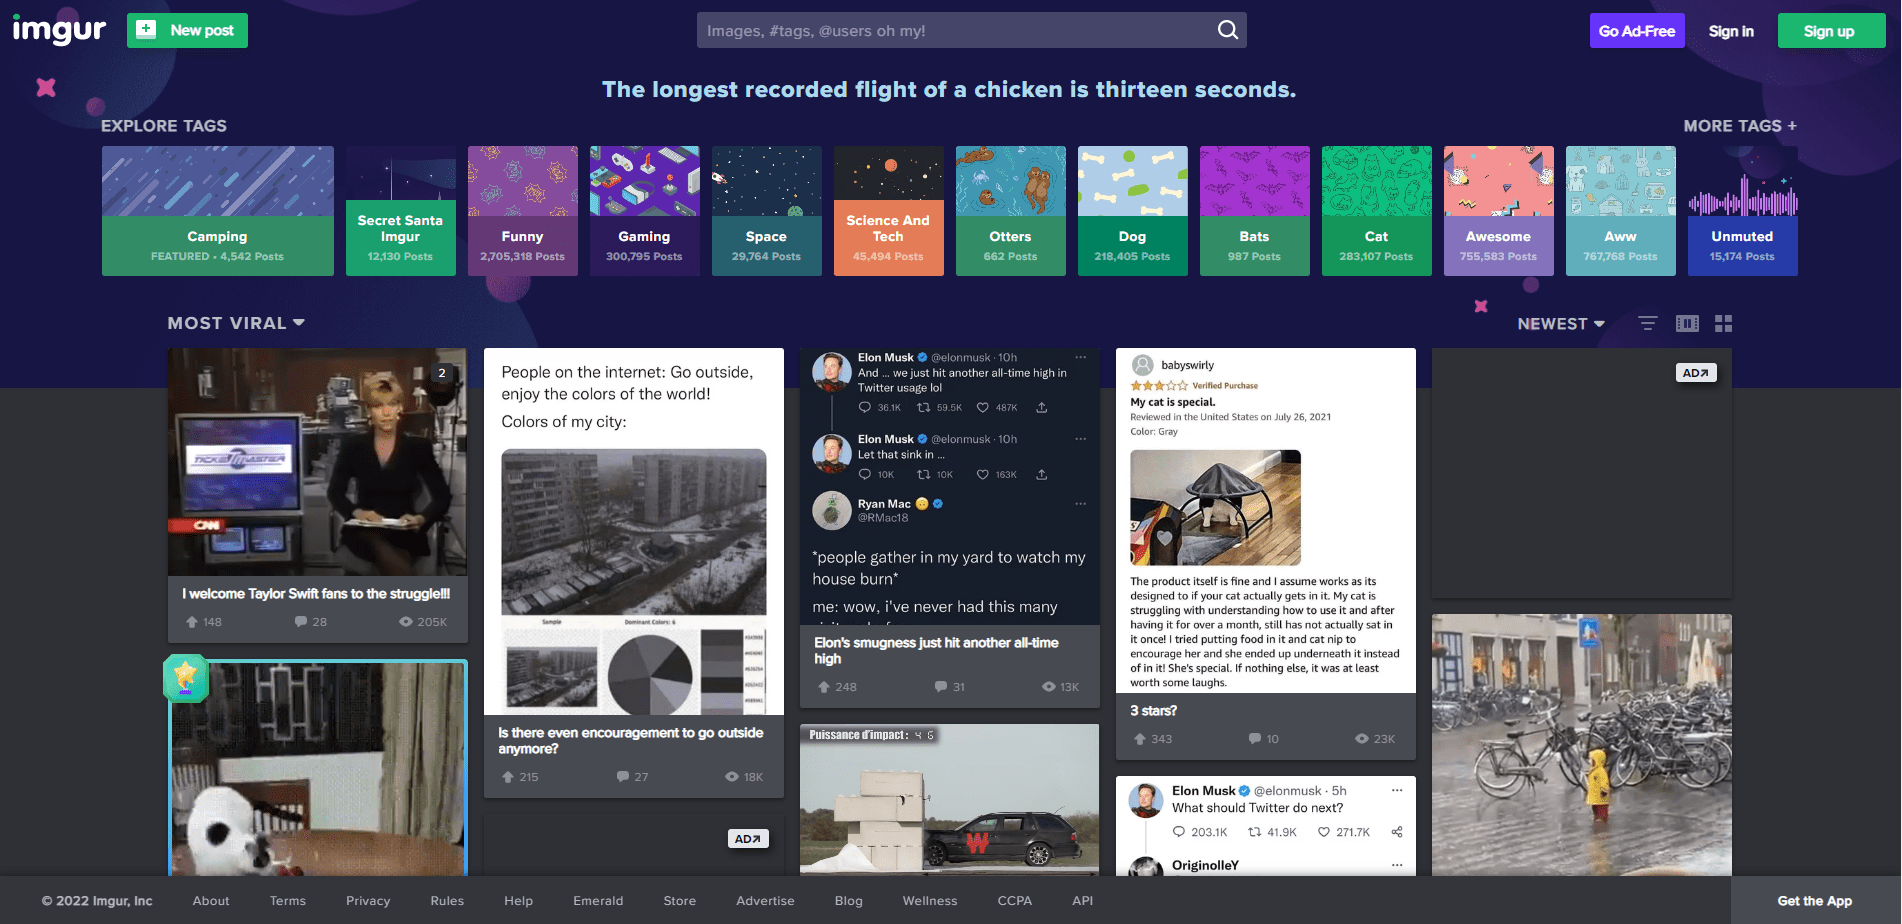 IMGUR Overview